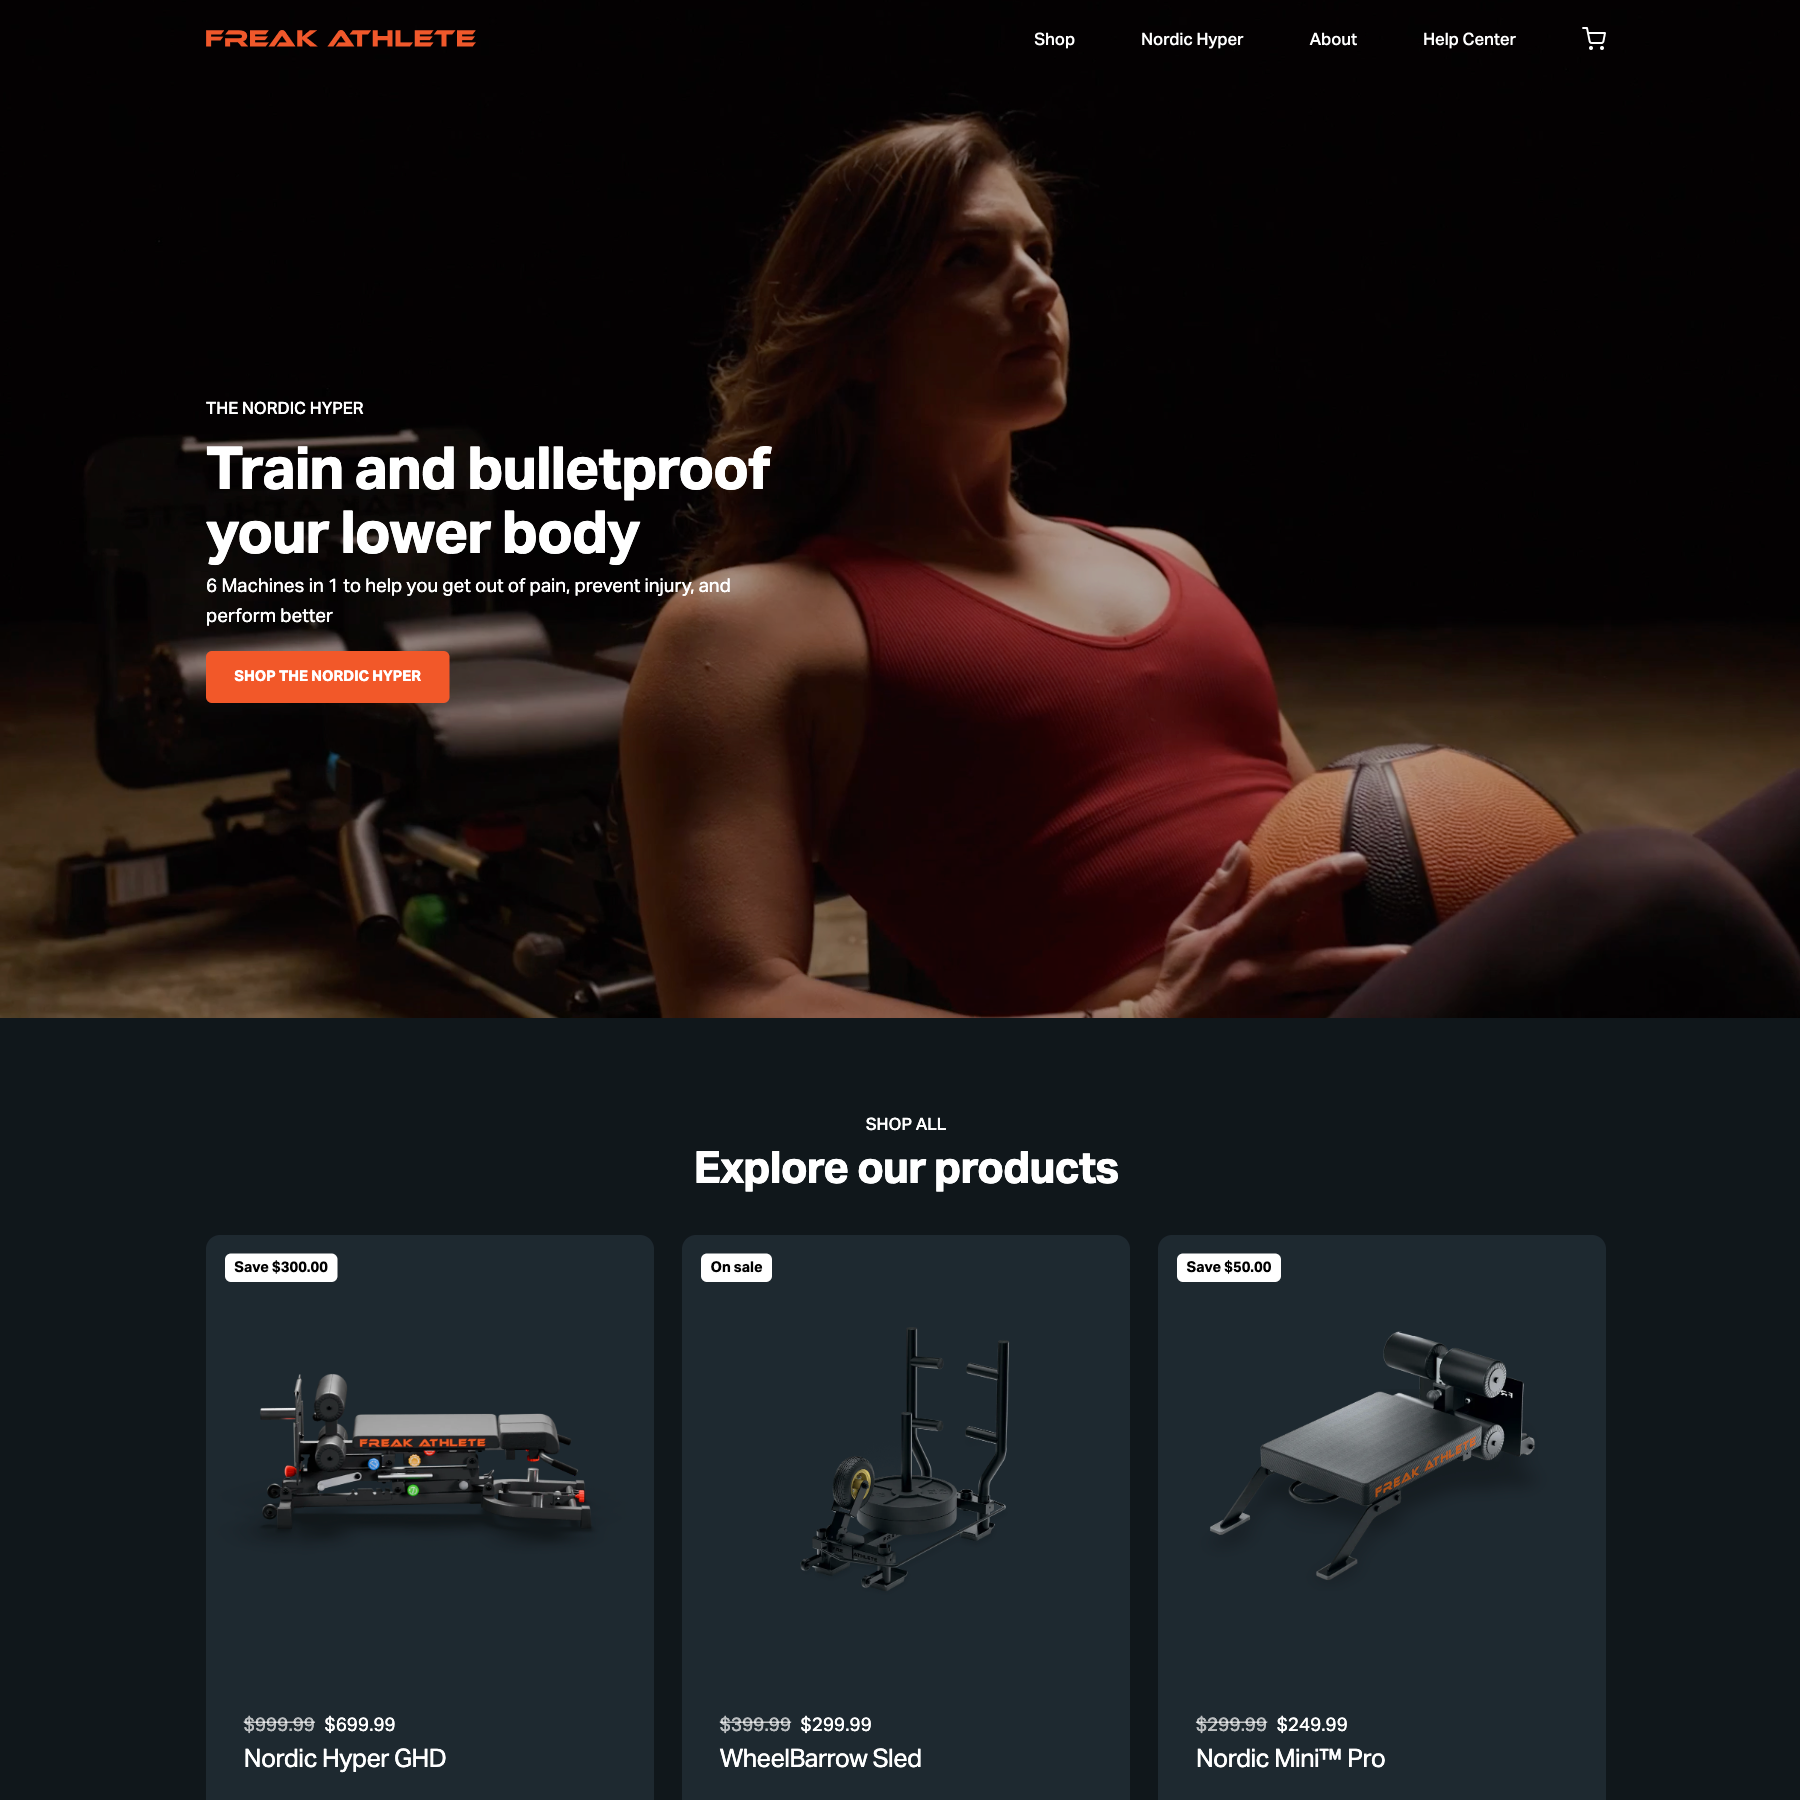 Screenshot of the Freak Athlete website after the rebrand launch